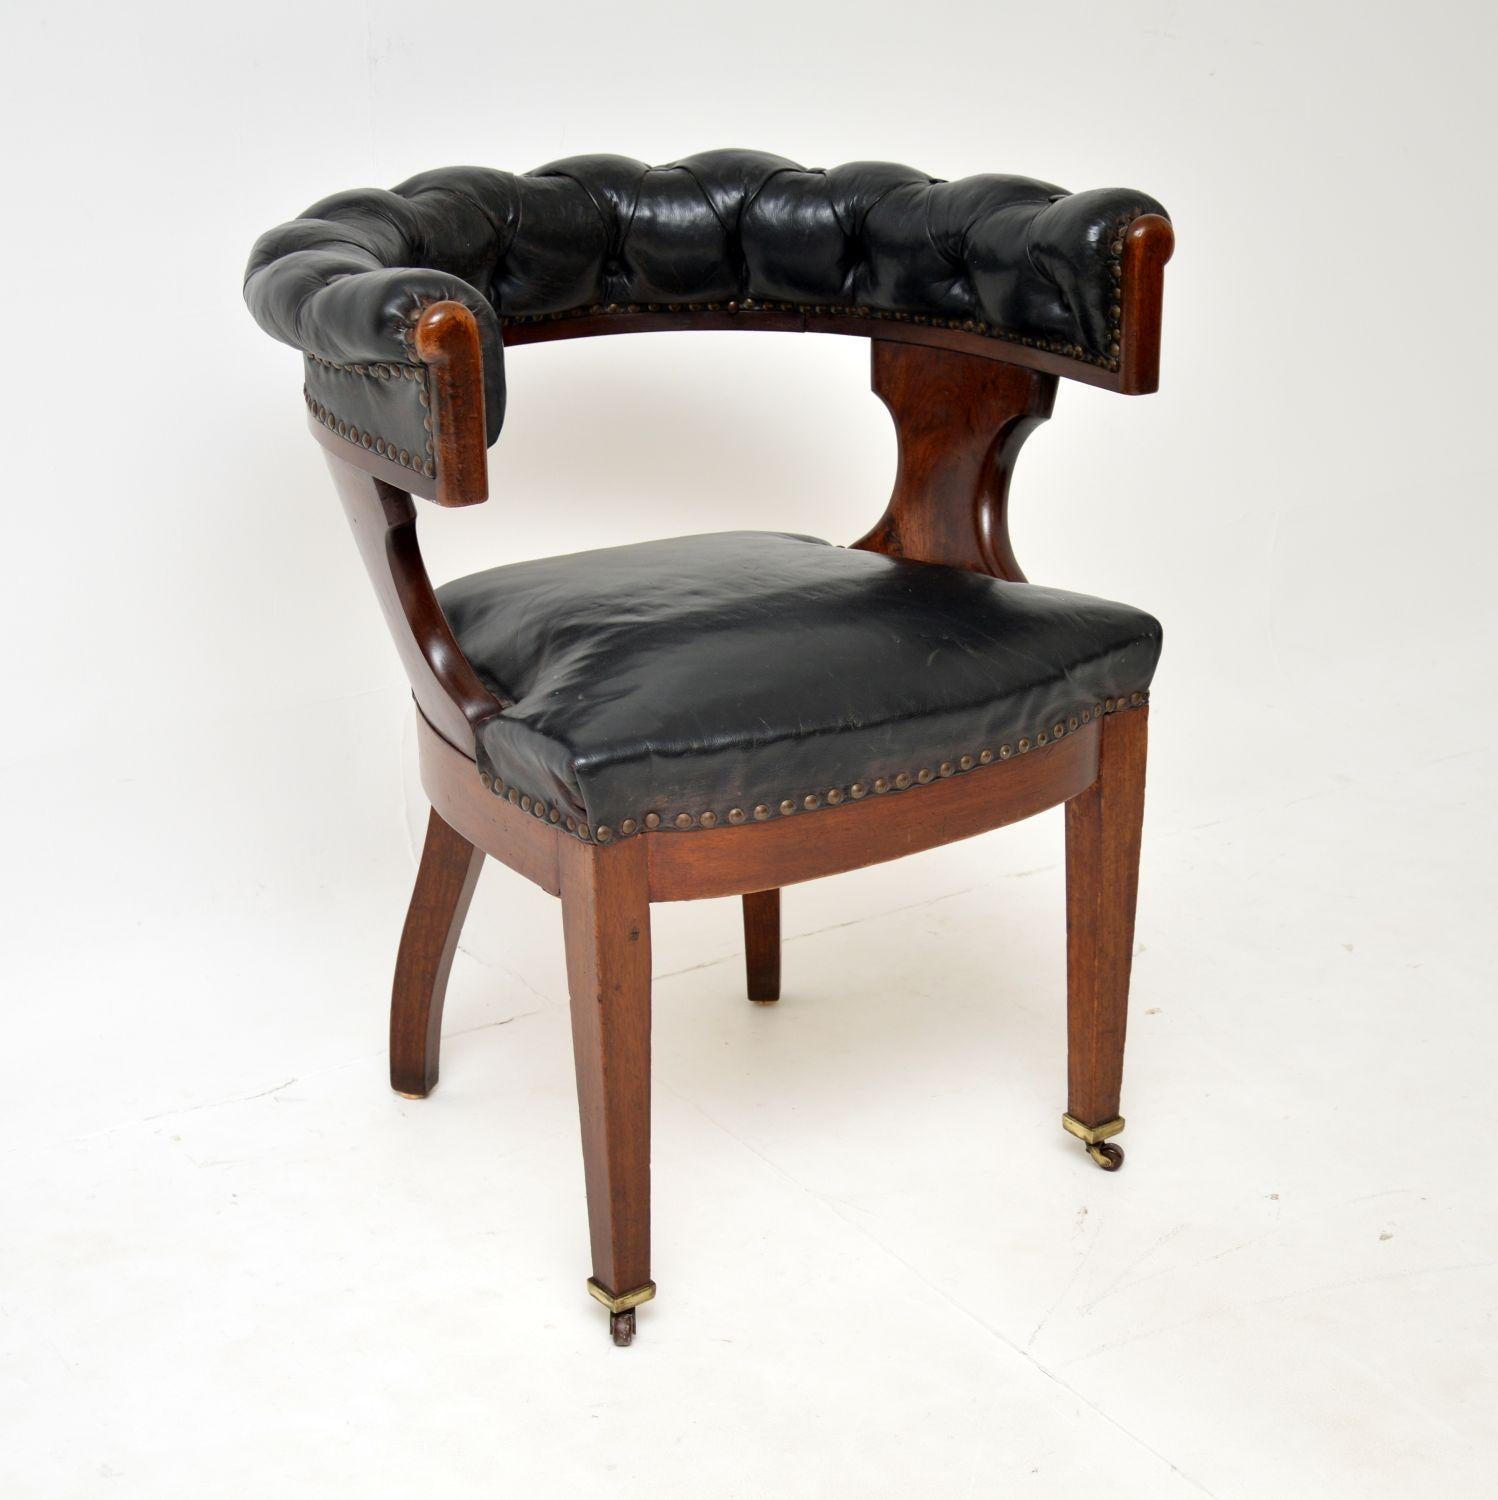 A superb antique Victorian period desk chair in leather and wood. This has a strong Arts & Crafts influence from the period, it dates from around 1880-1900.

The quality is amazing, this is a great size and is very comfortable. The seating area is